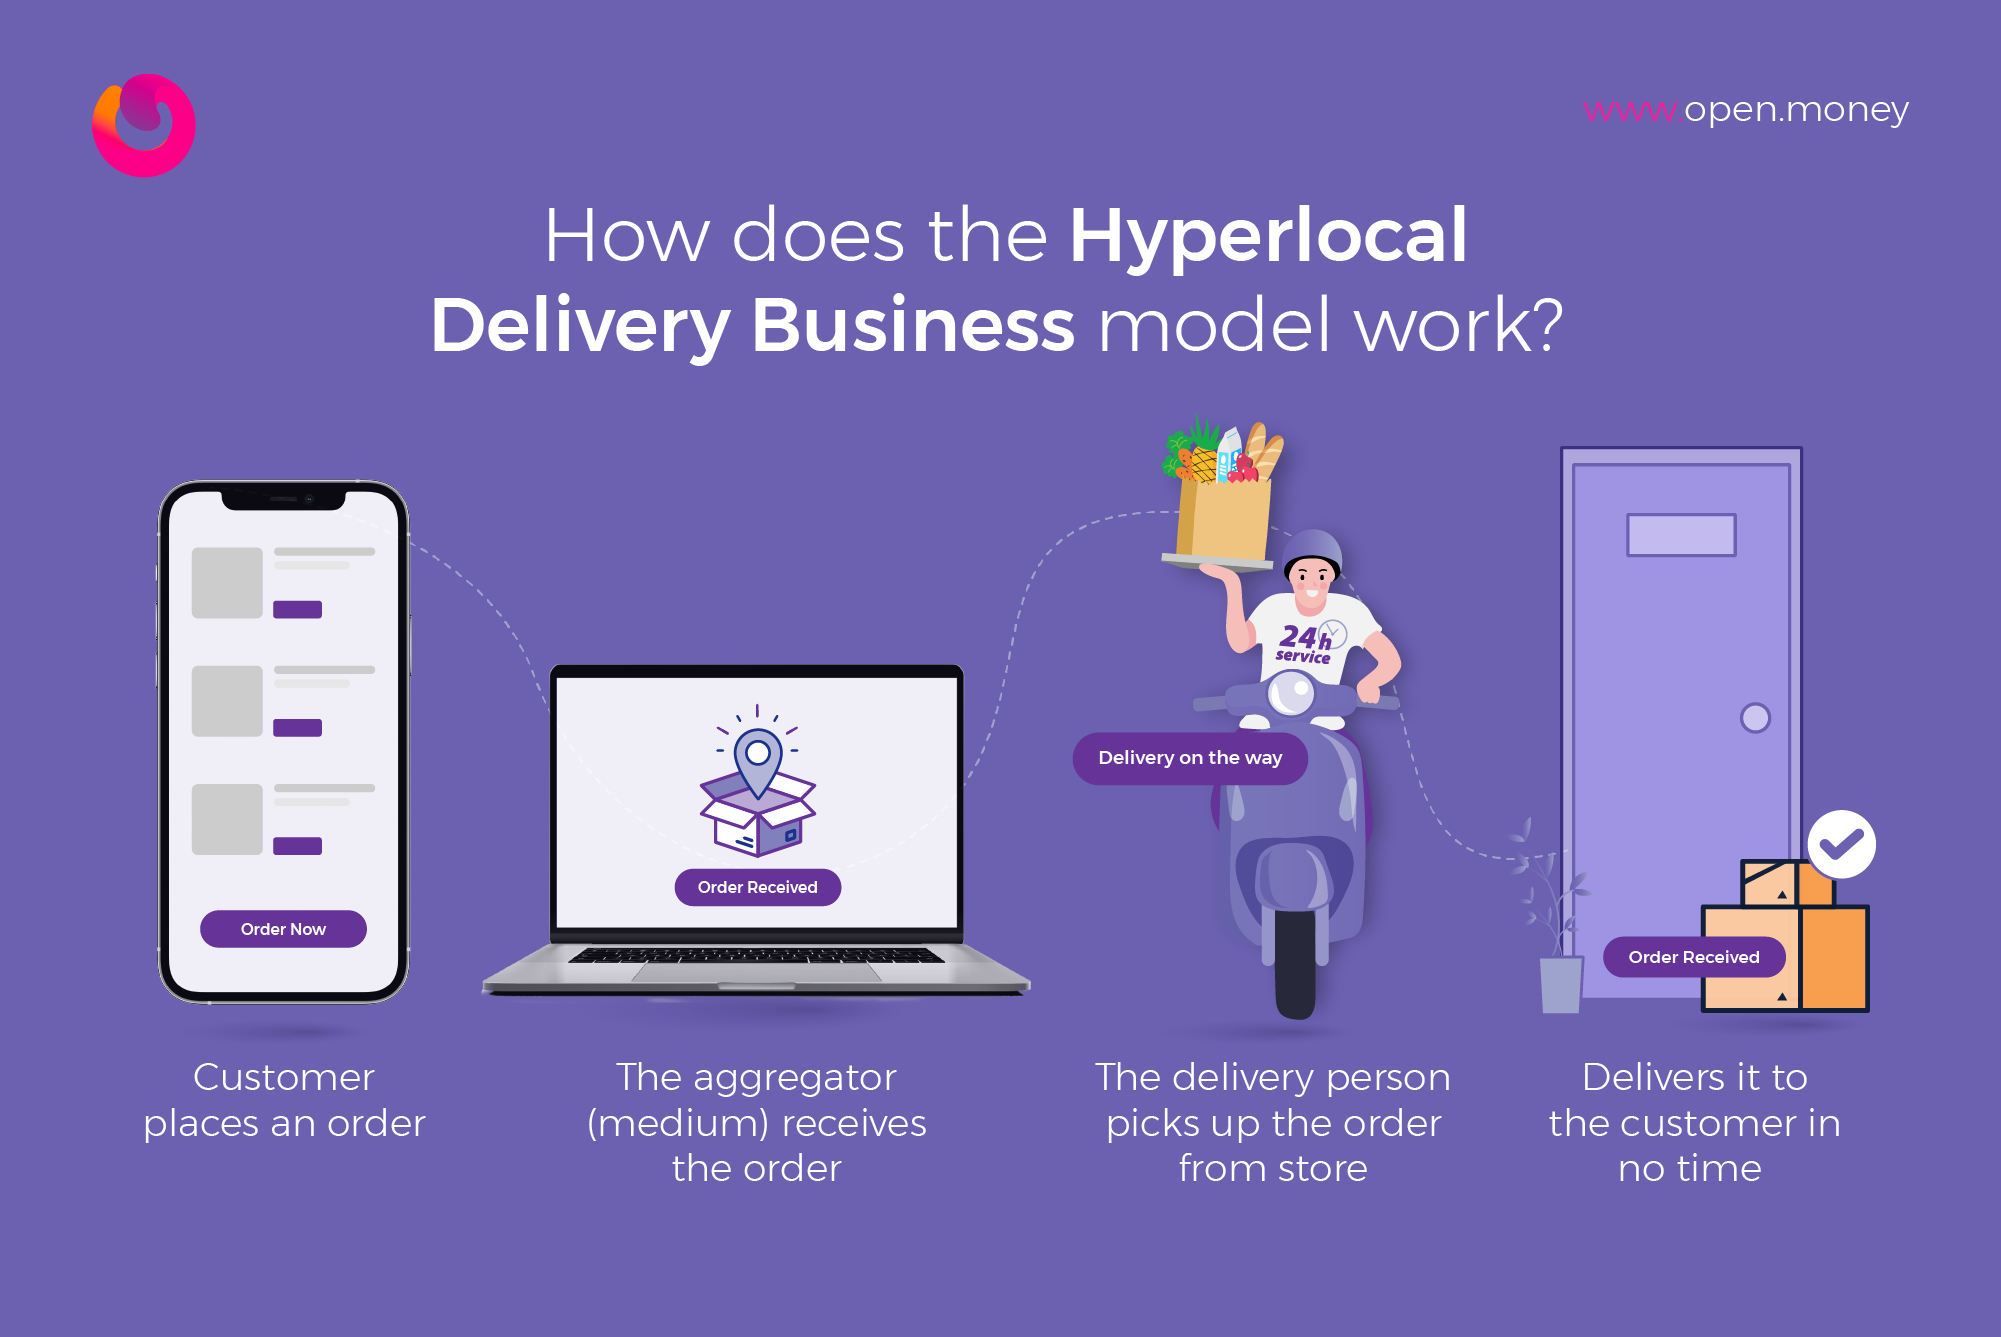 How does the Hyperlocal Business Delivery model work?